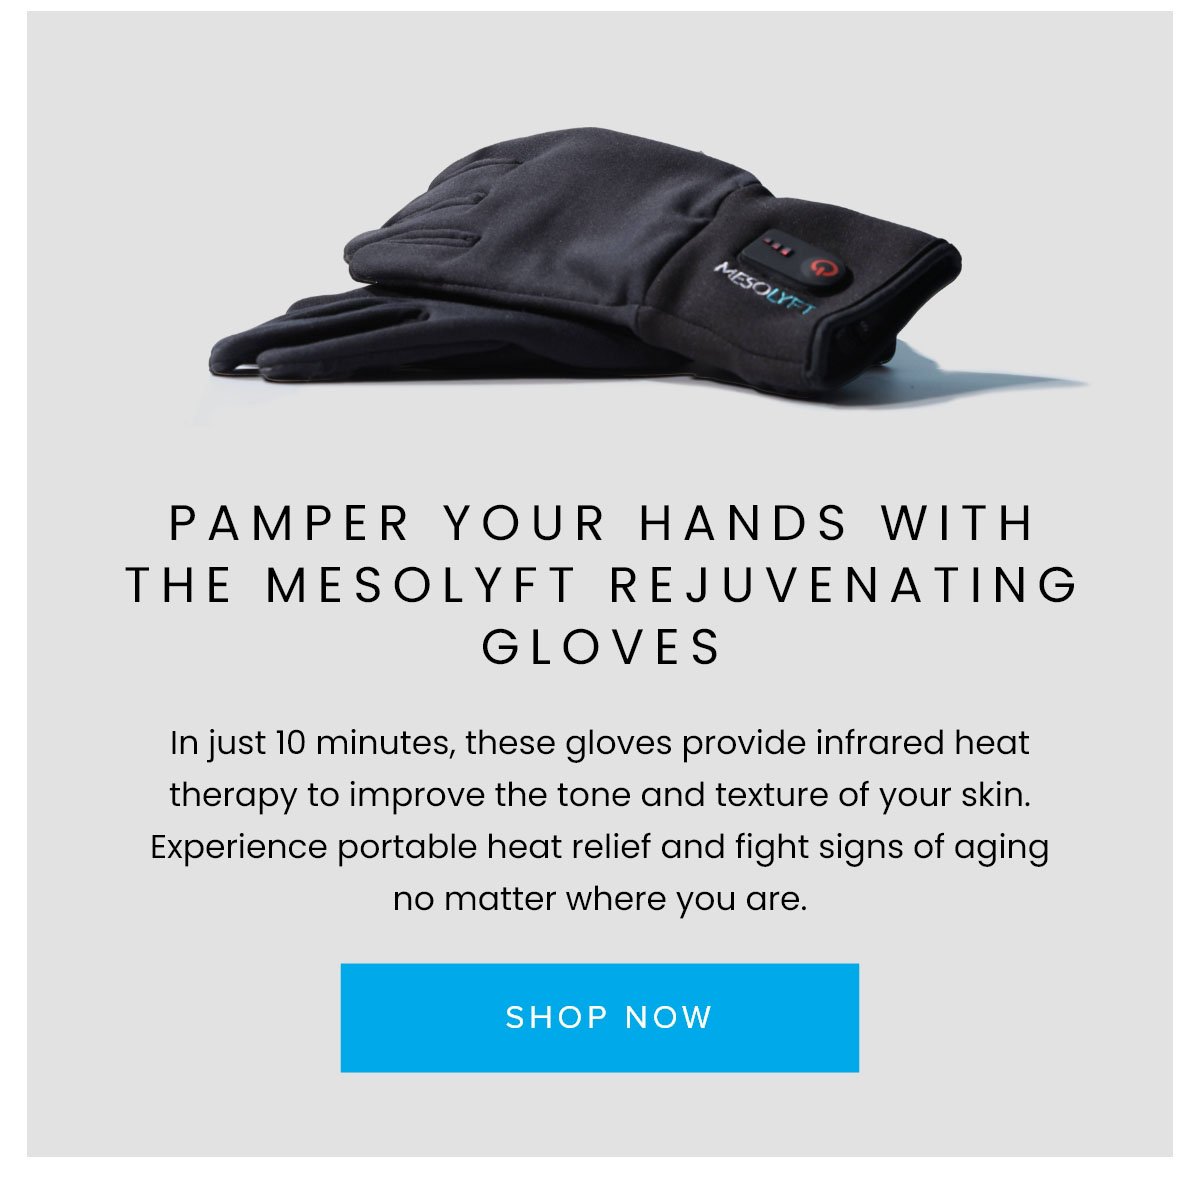 Pamper your hands with the MesoLyft Rejuvenating Gloves [ SHOP NOW ]